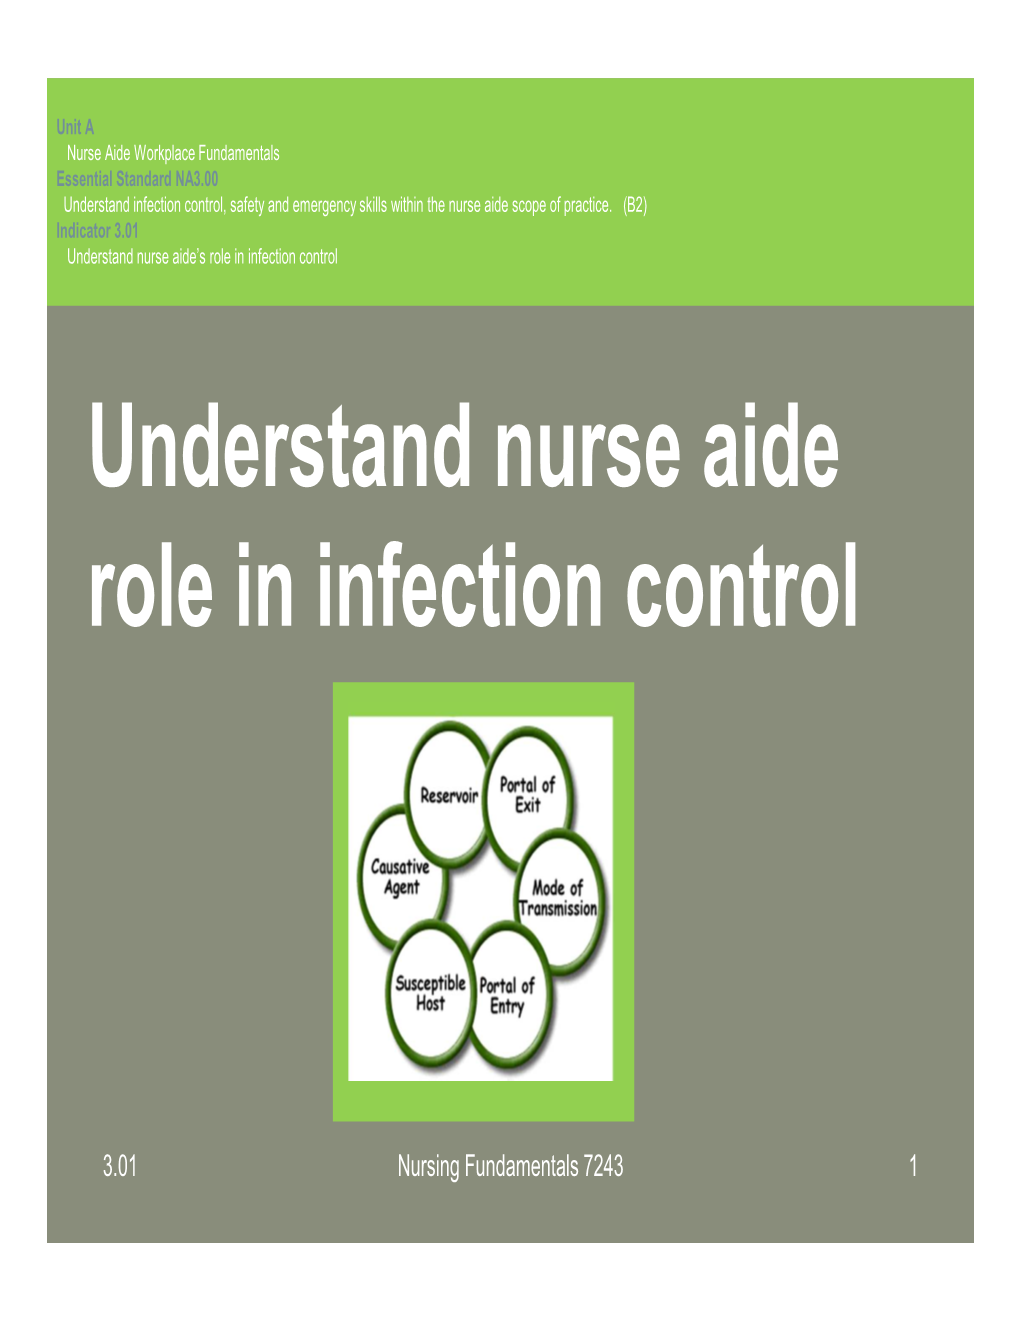 3.01 Ppt Infection Control NF 2014